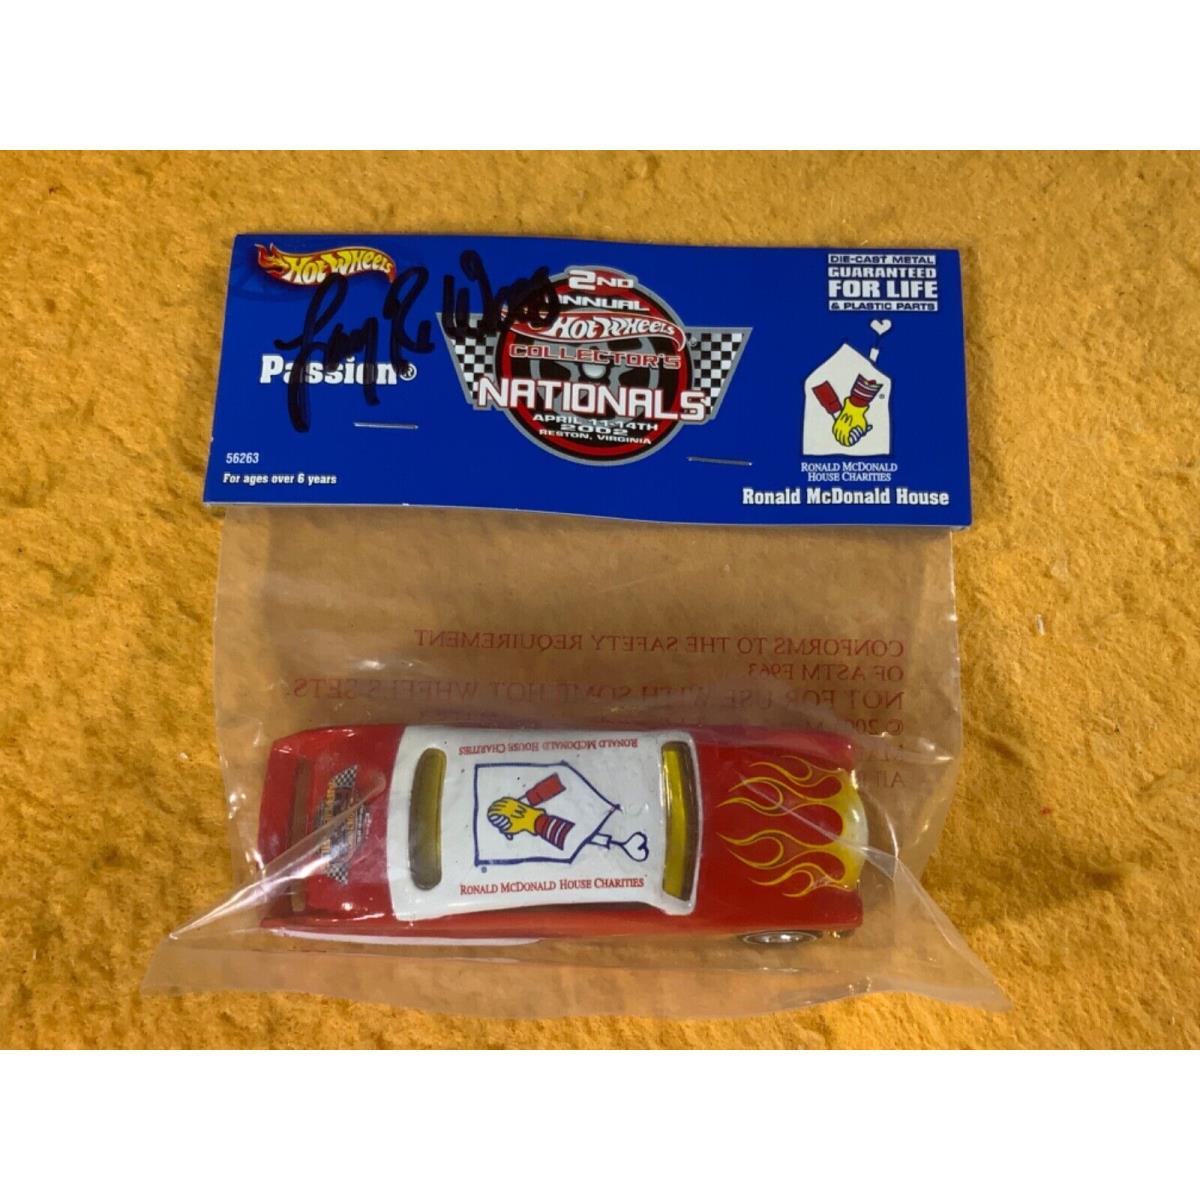 K9-98 Hot Wheels Ronald Mcdonald House Charity - Passion - Larry R. Woods Signed